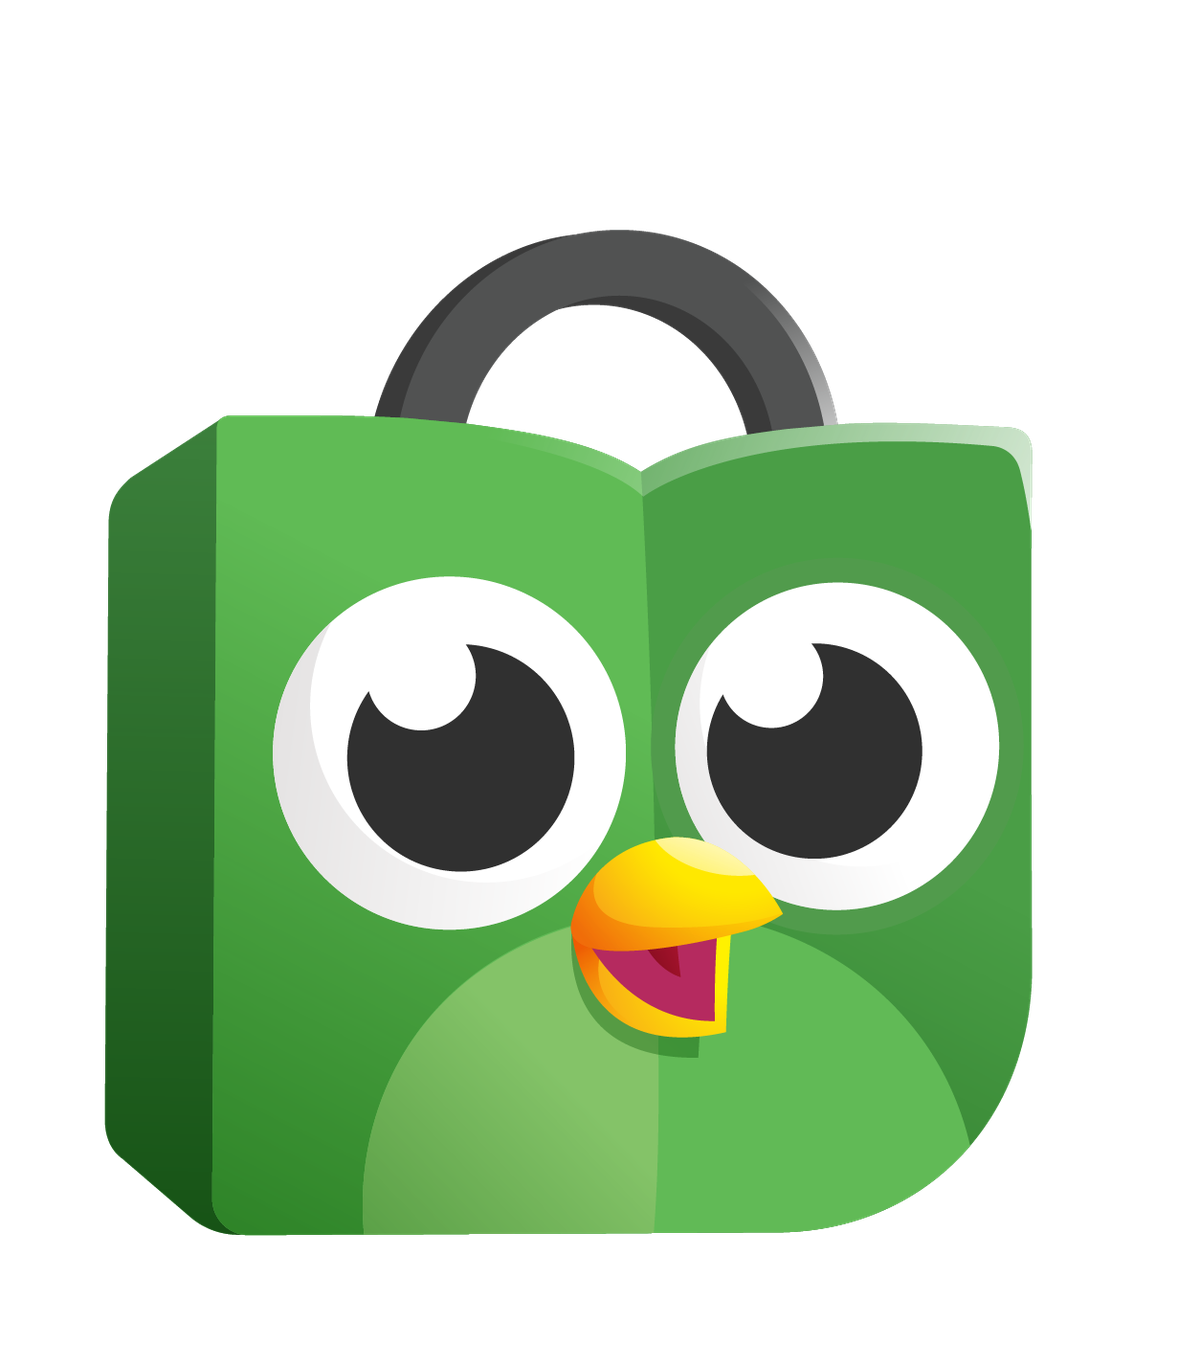 Tokopedia is hiring a Account Manager (Marketing Solutions) in Jakarta